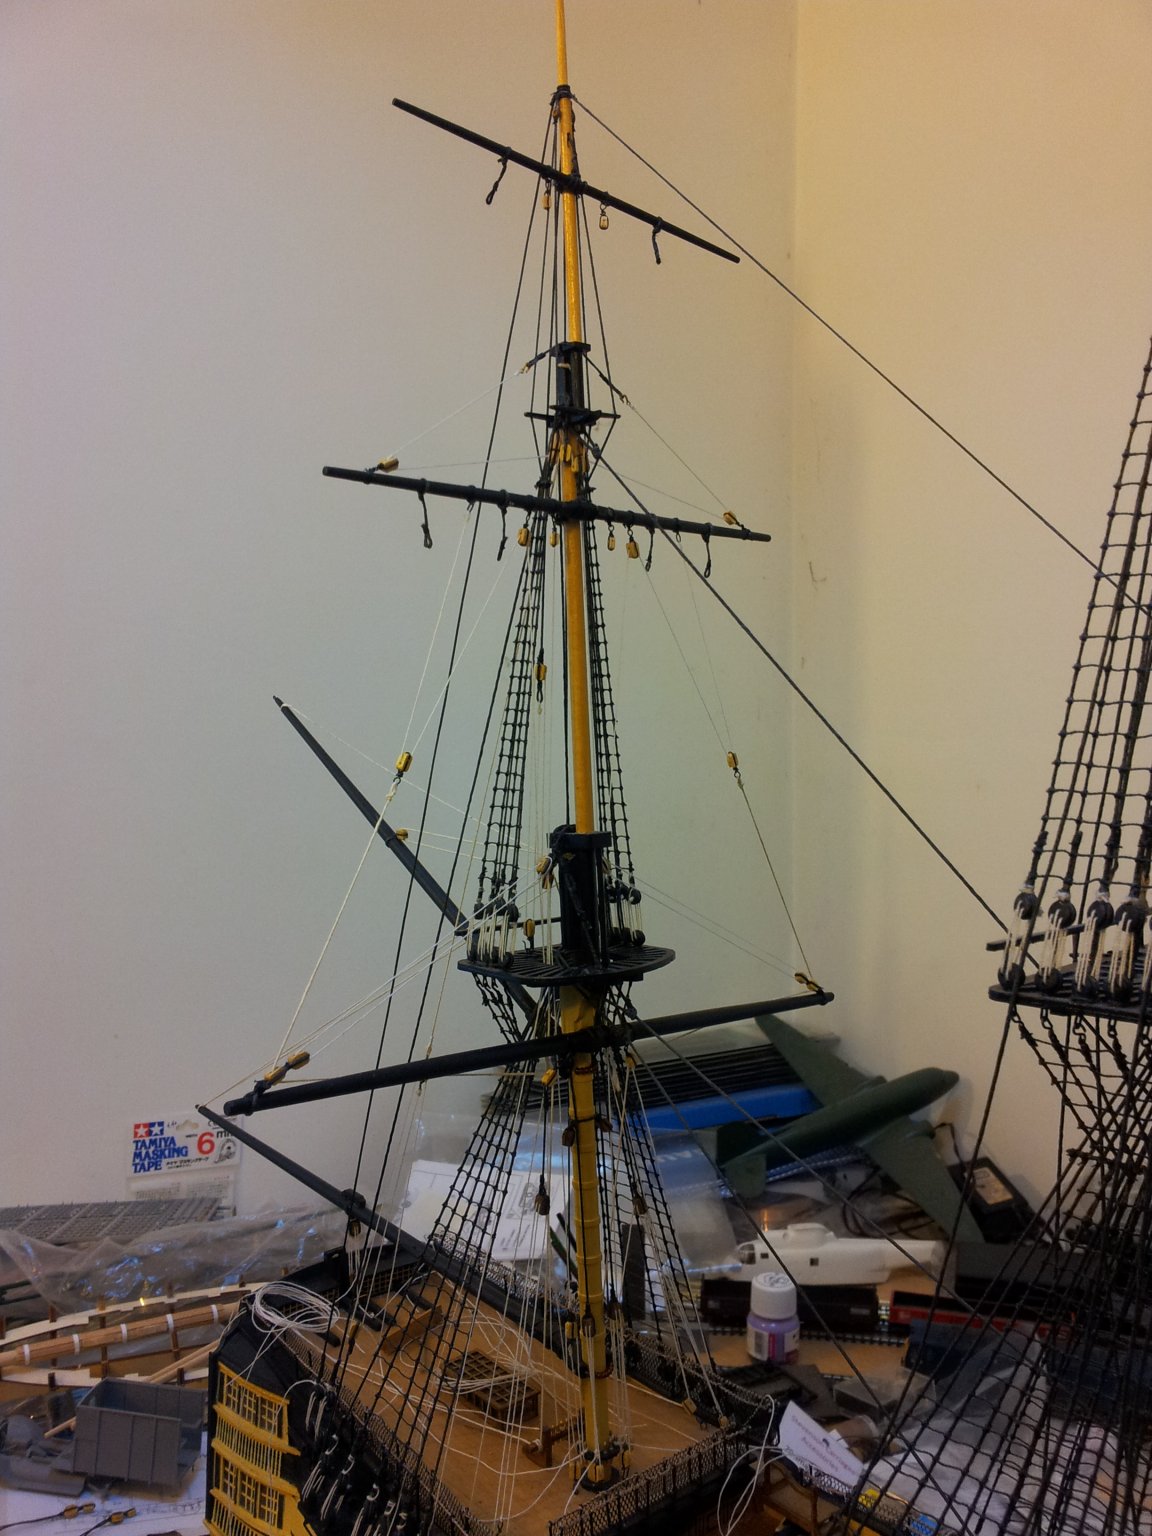 Hms Victory By Clearway Billing Boats 1 75 Page 9 Kit Build Logs For Subjects Built From 1751 1800 Model Ship World